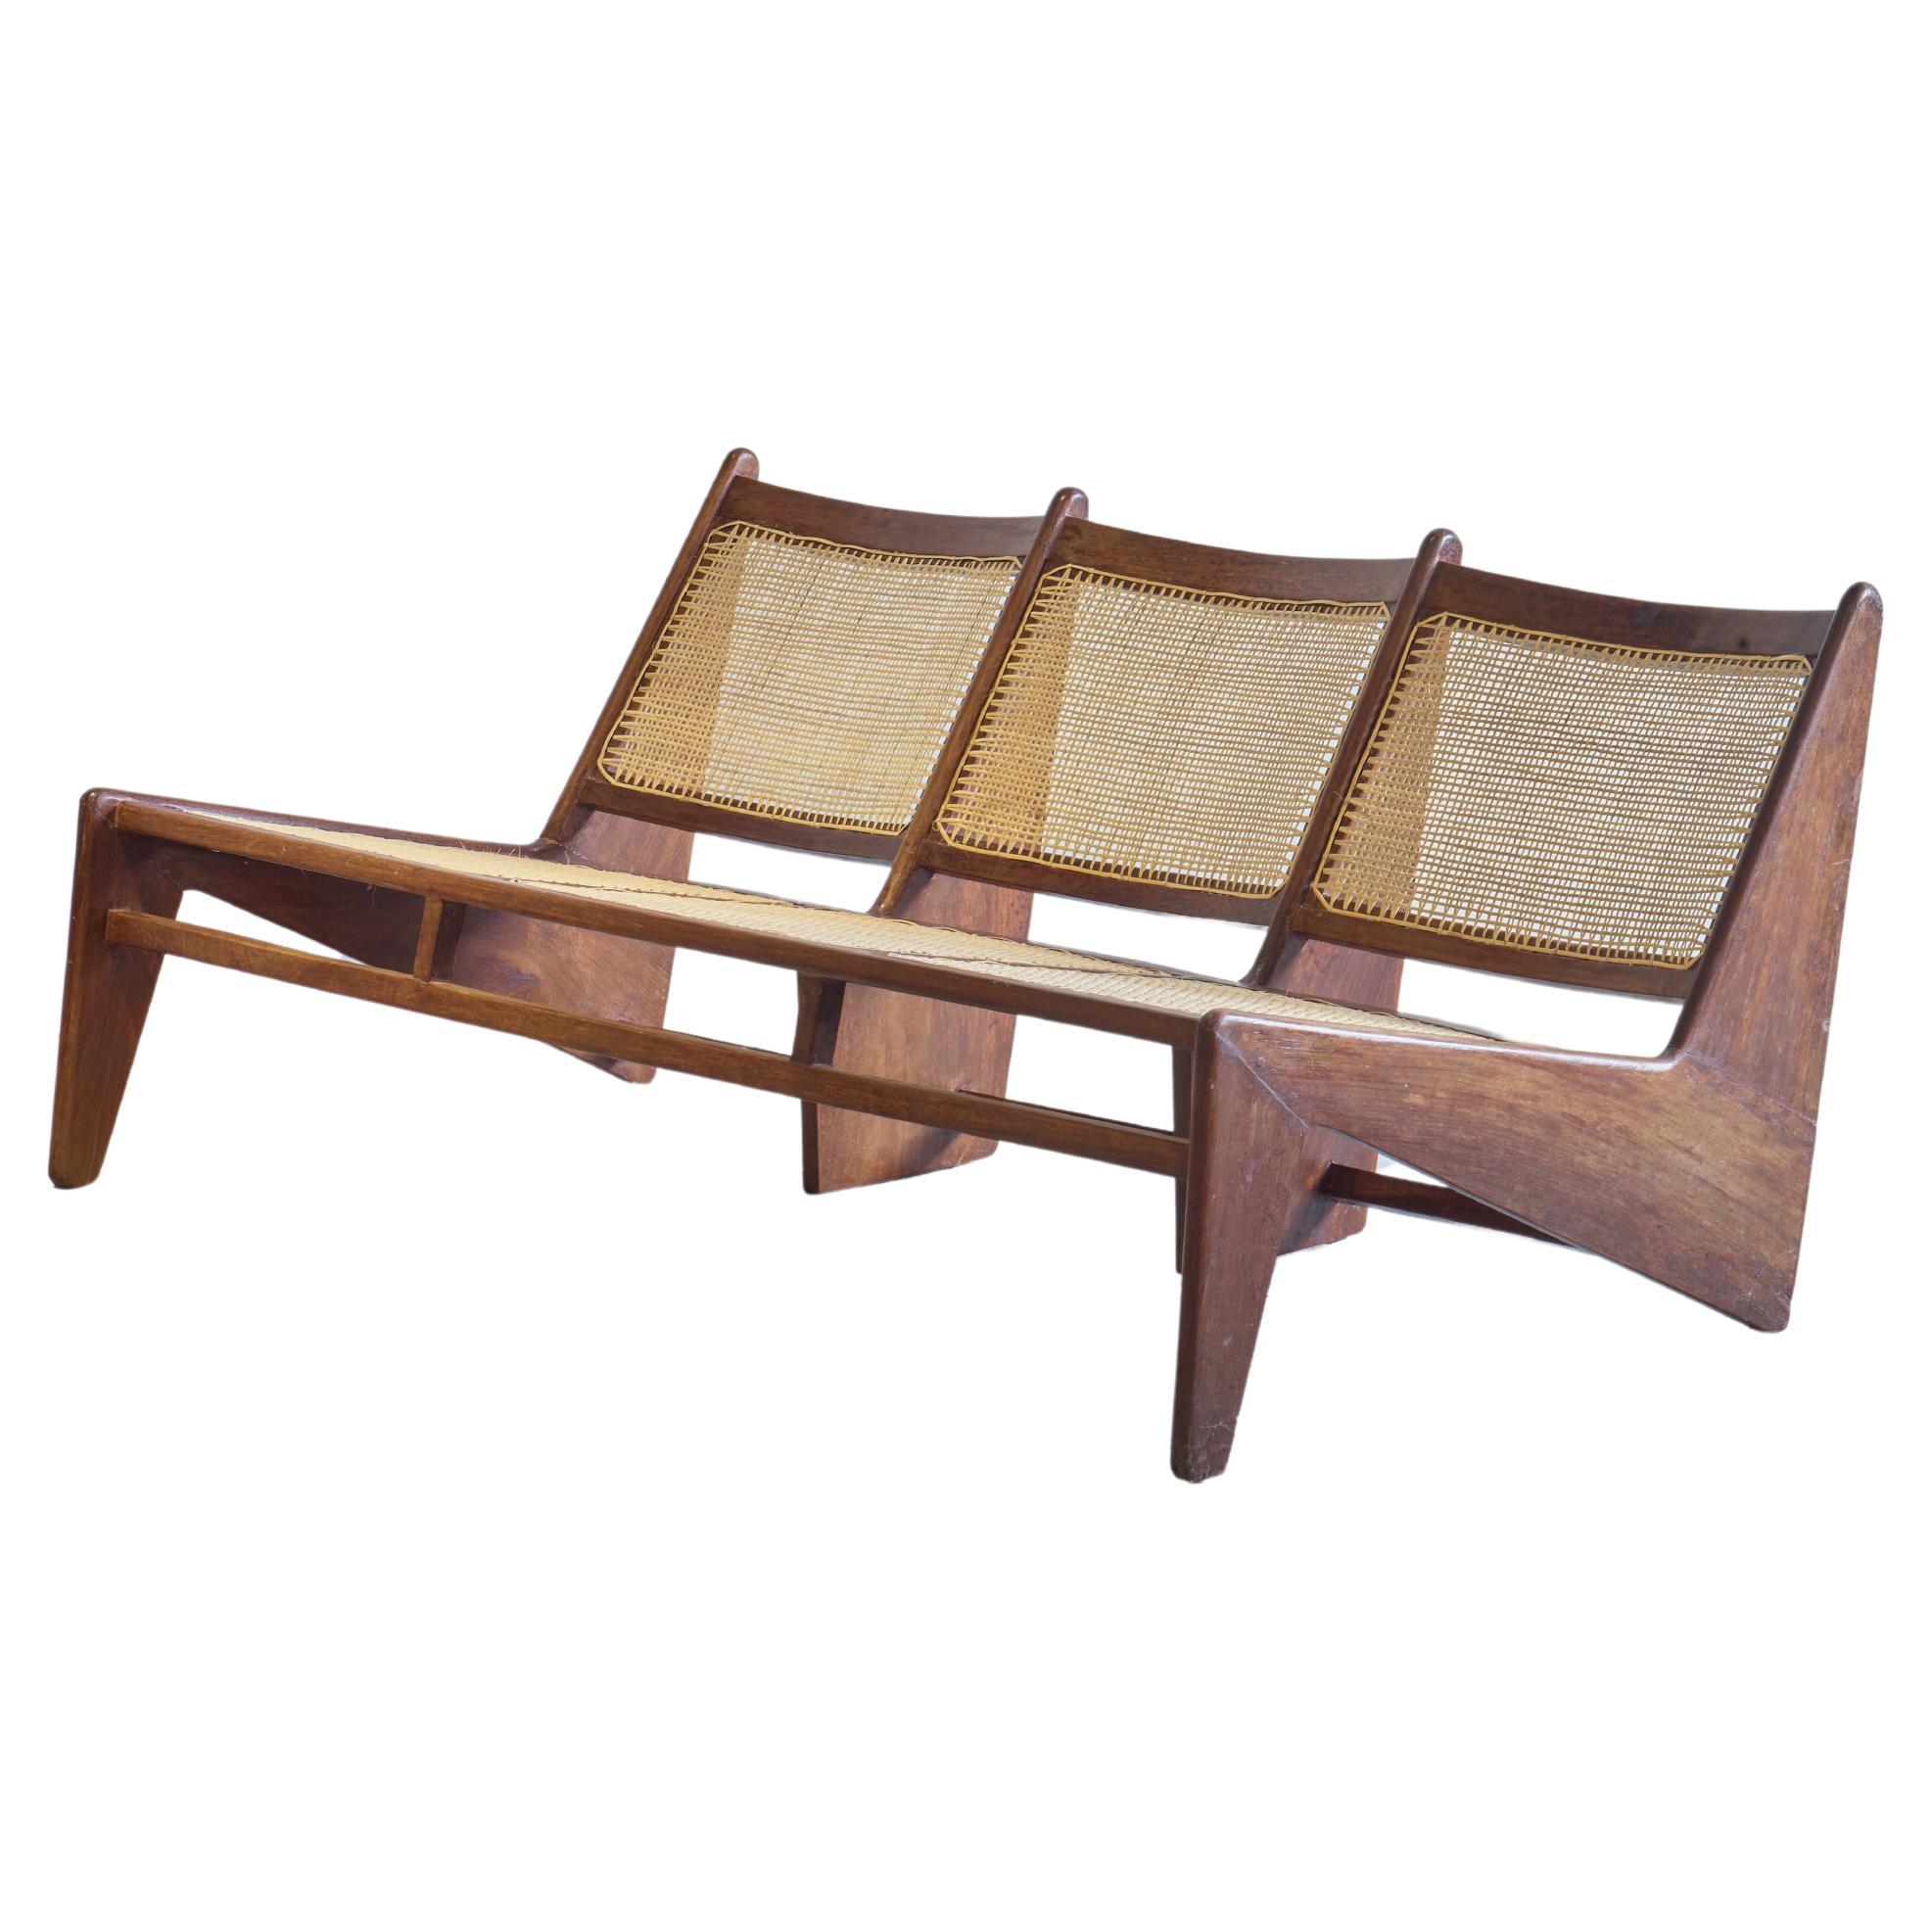 Pierre Jeanneret PJ-SI-59-B Bench Seat / Authentic Mid-Century Modern For Sale